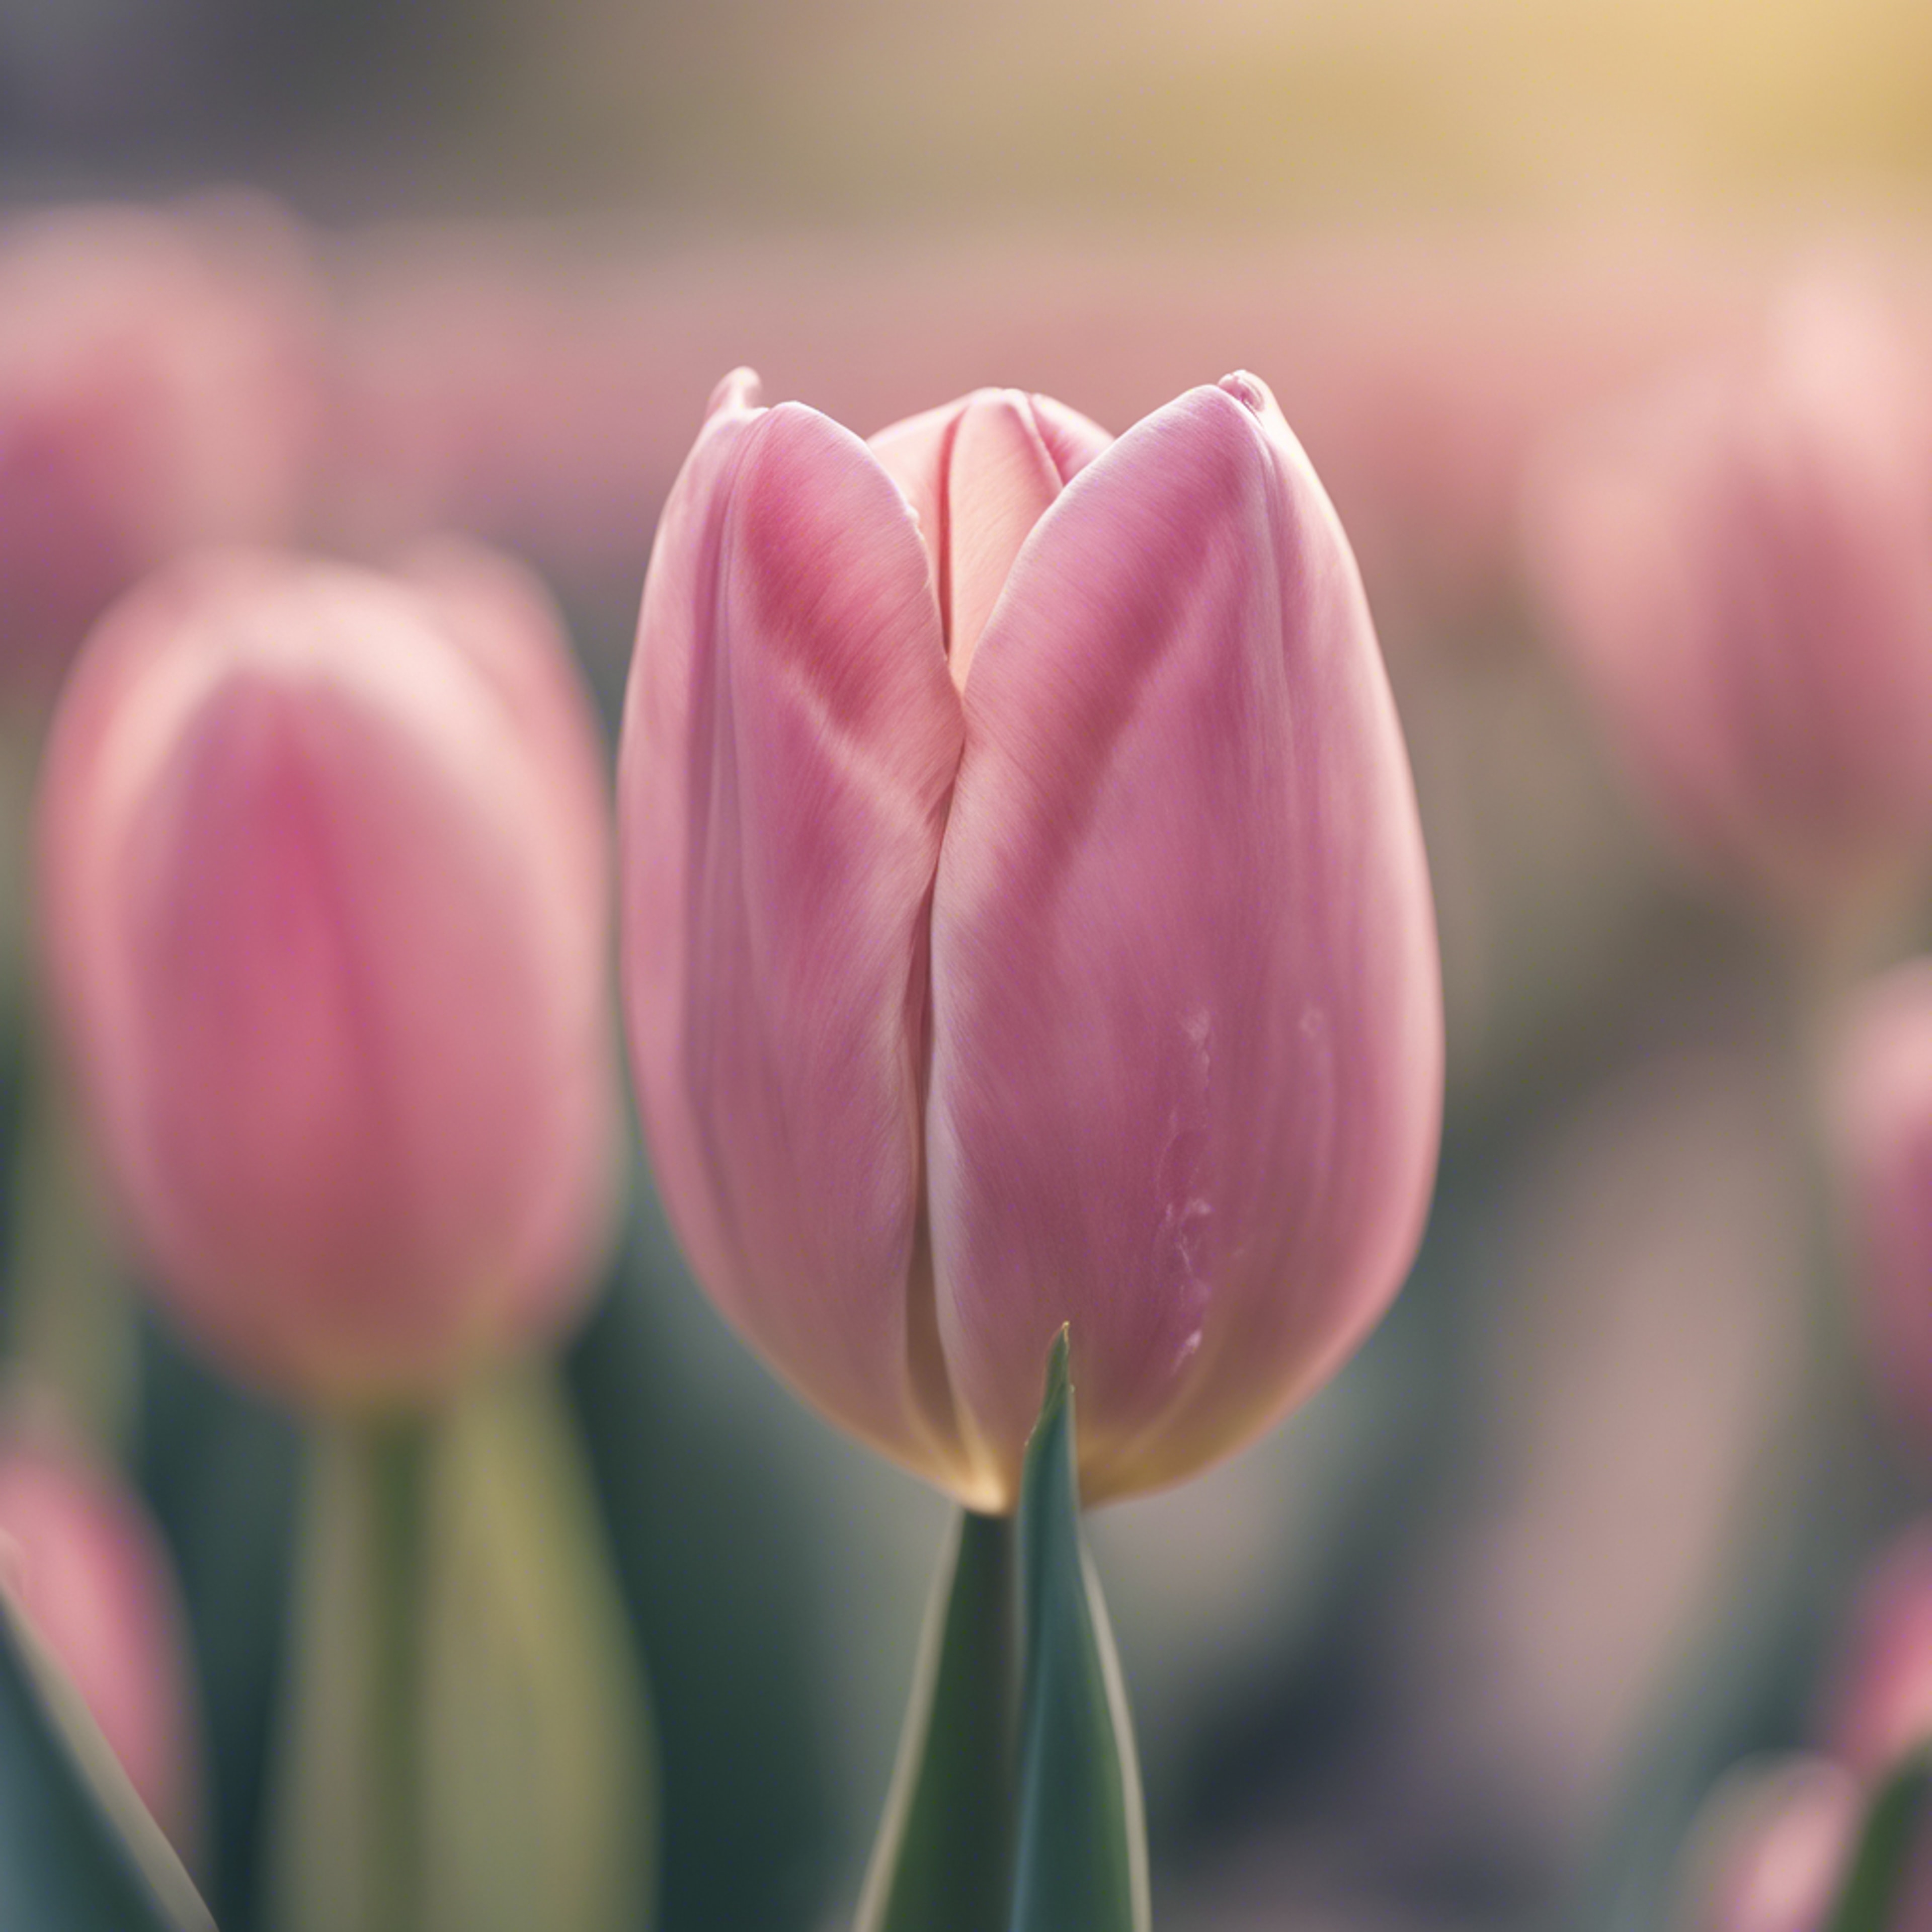 A close-up of a lone pink tulip against a soft and blurry pastel background Валлпапер[4132f8cb968043e28bd5]